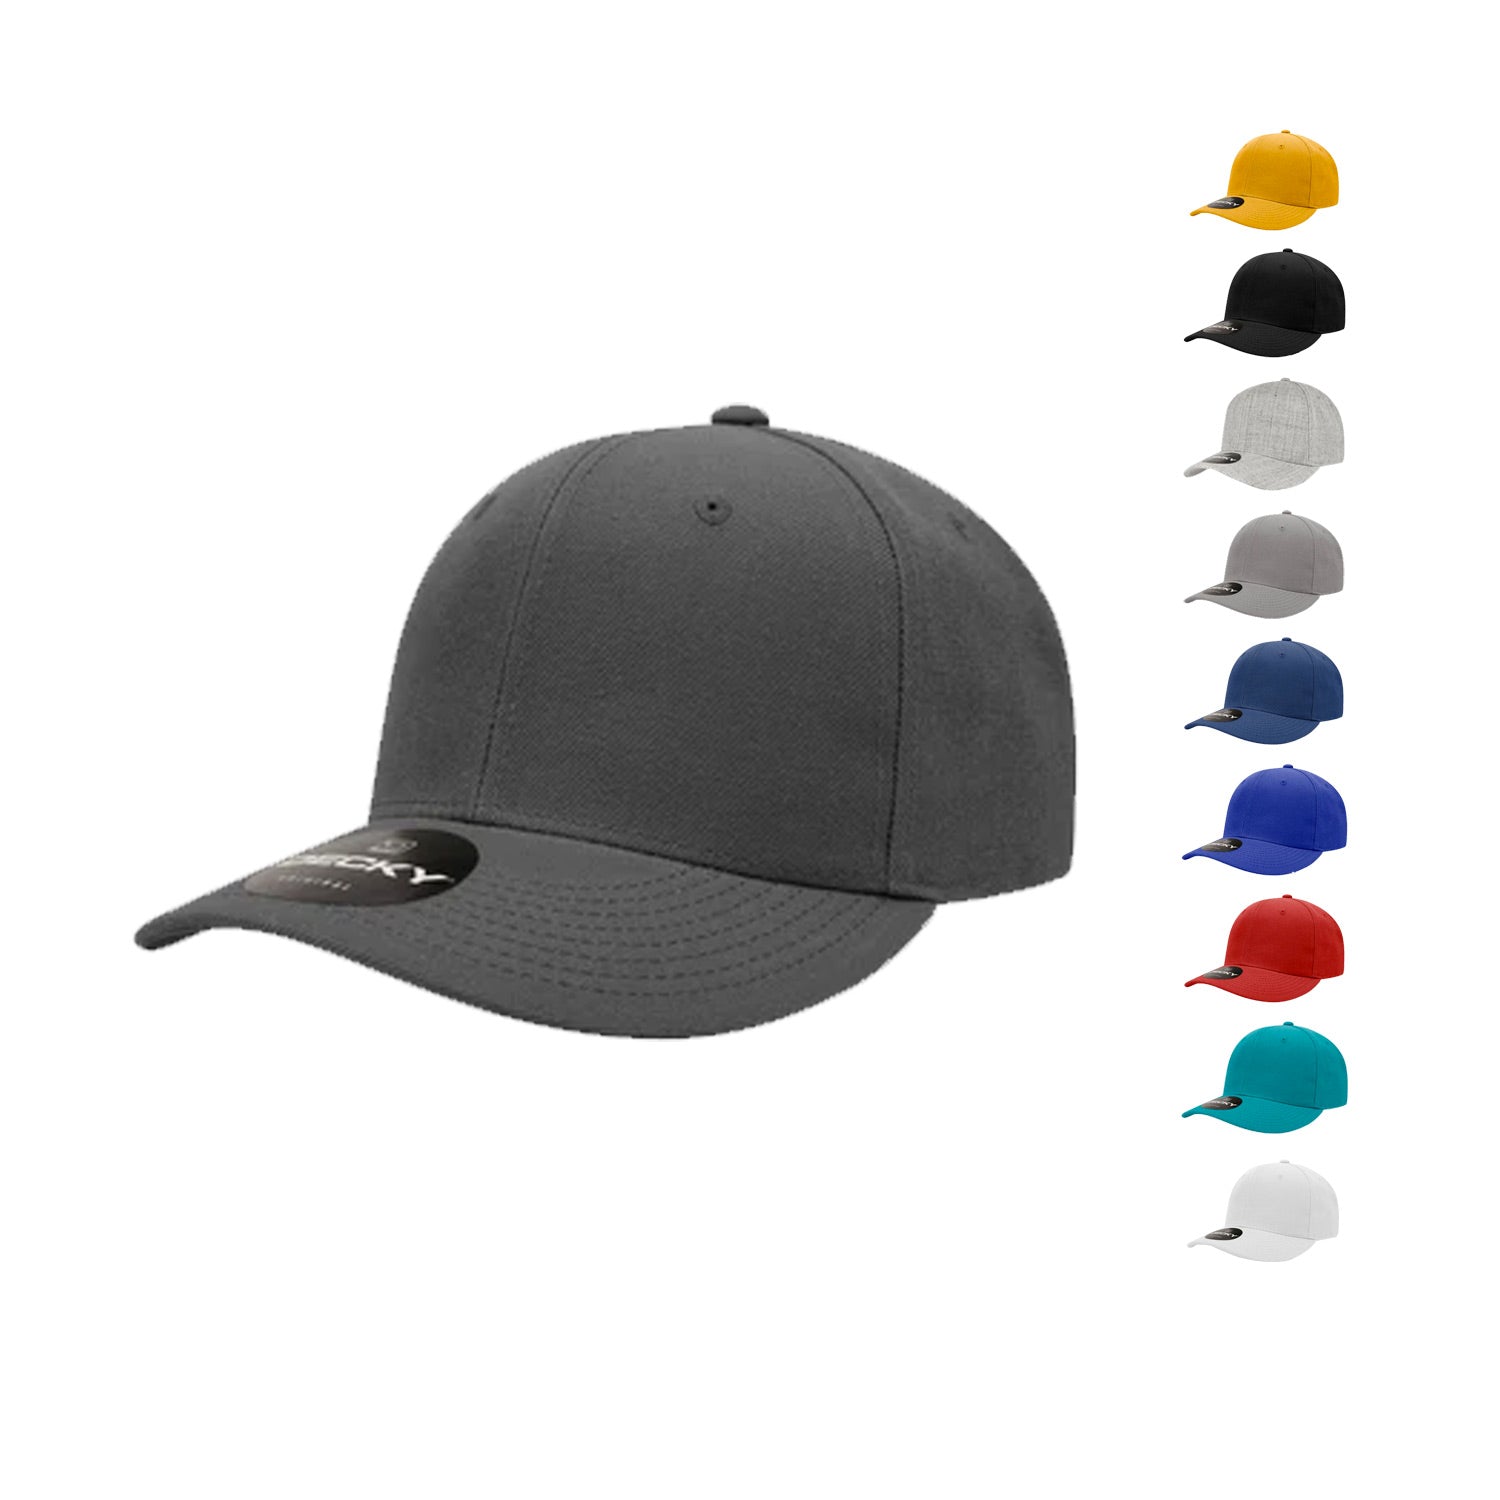 Decky 1040 Trucker Snapback Blank Caps Panel High Structured Profile Hats 5